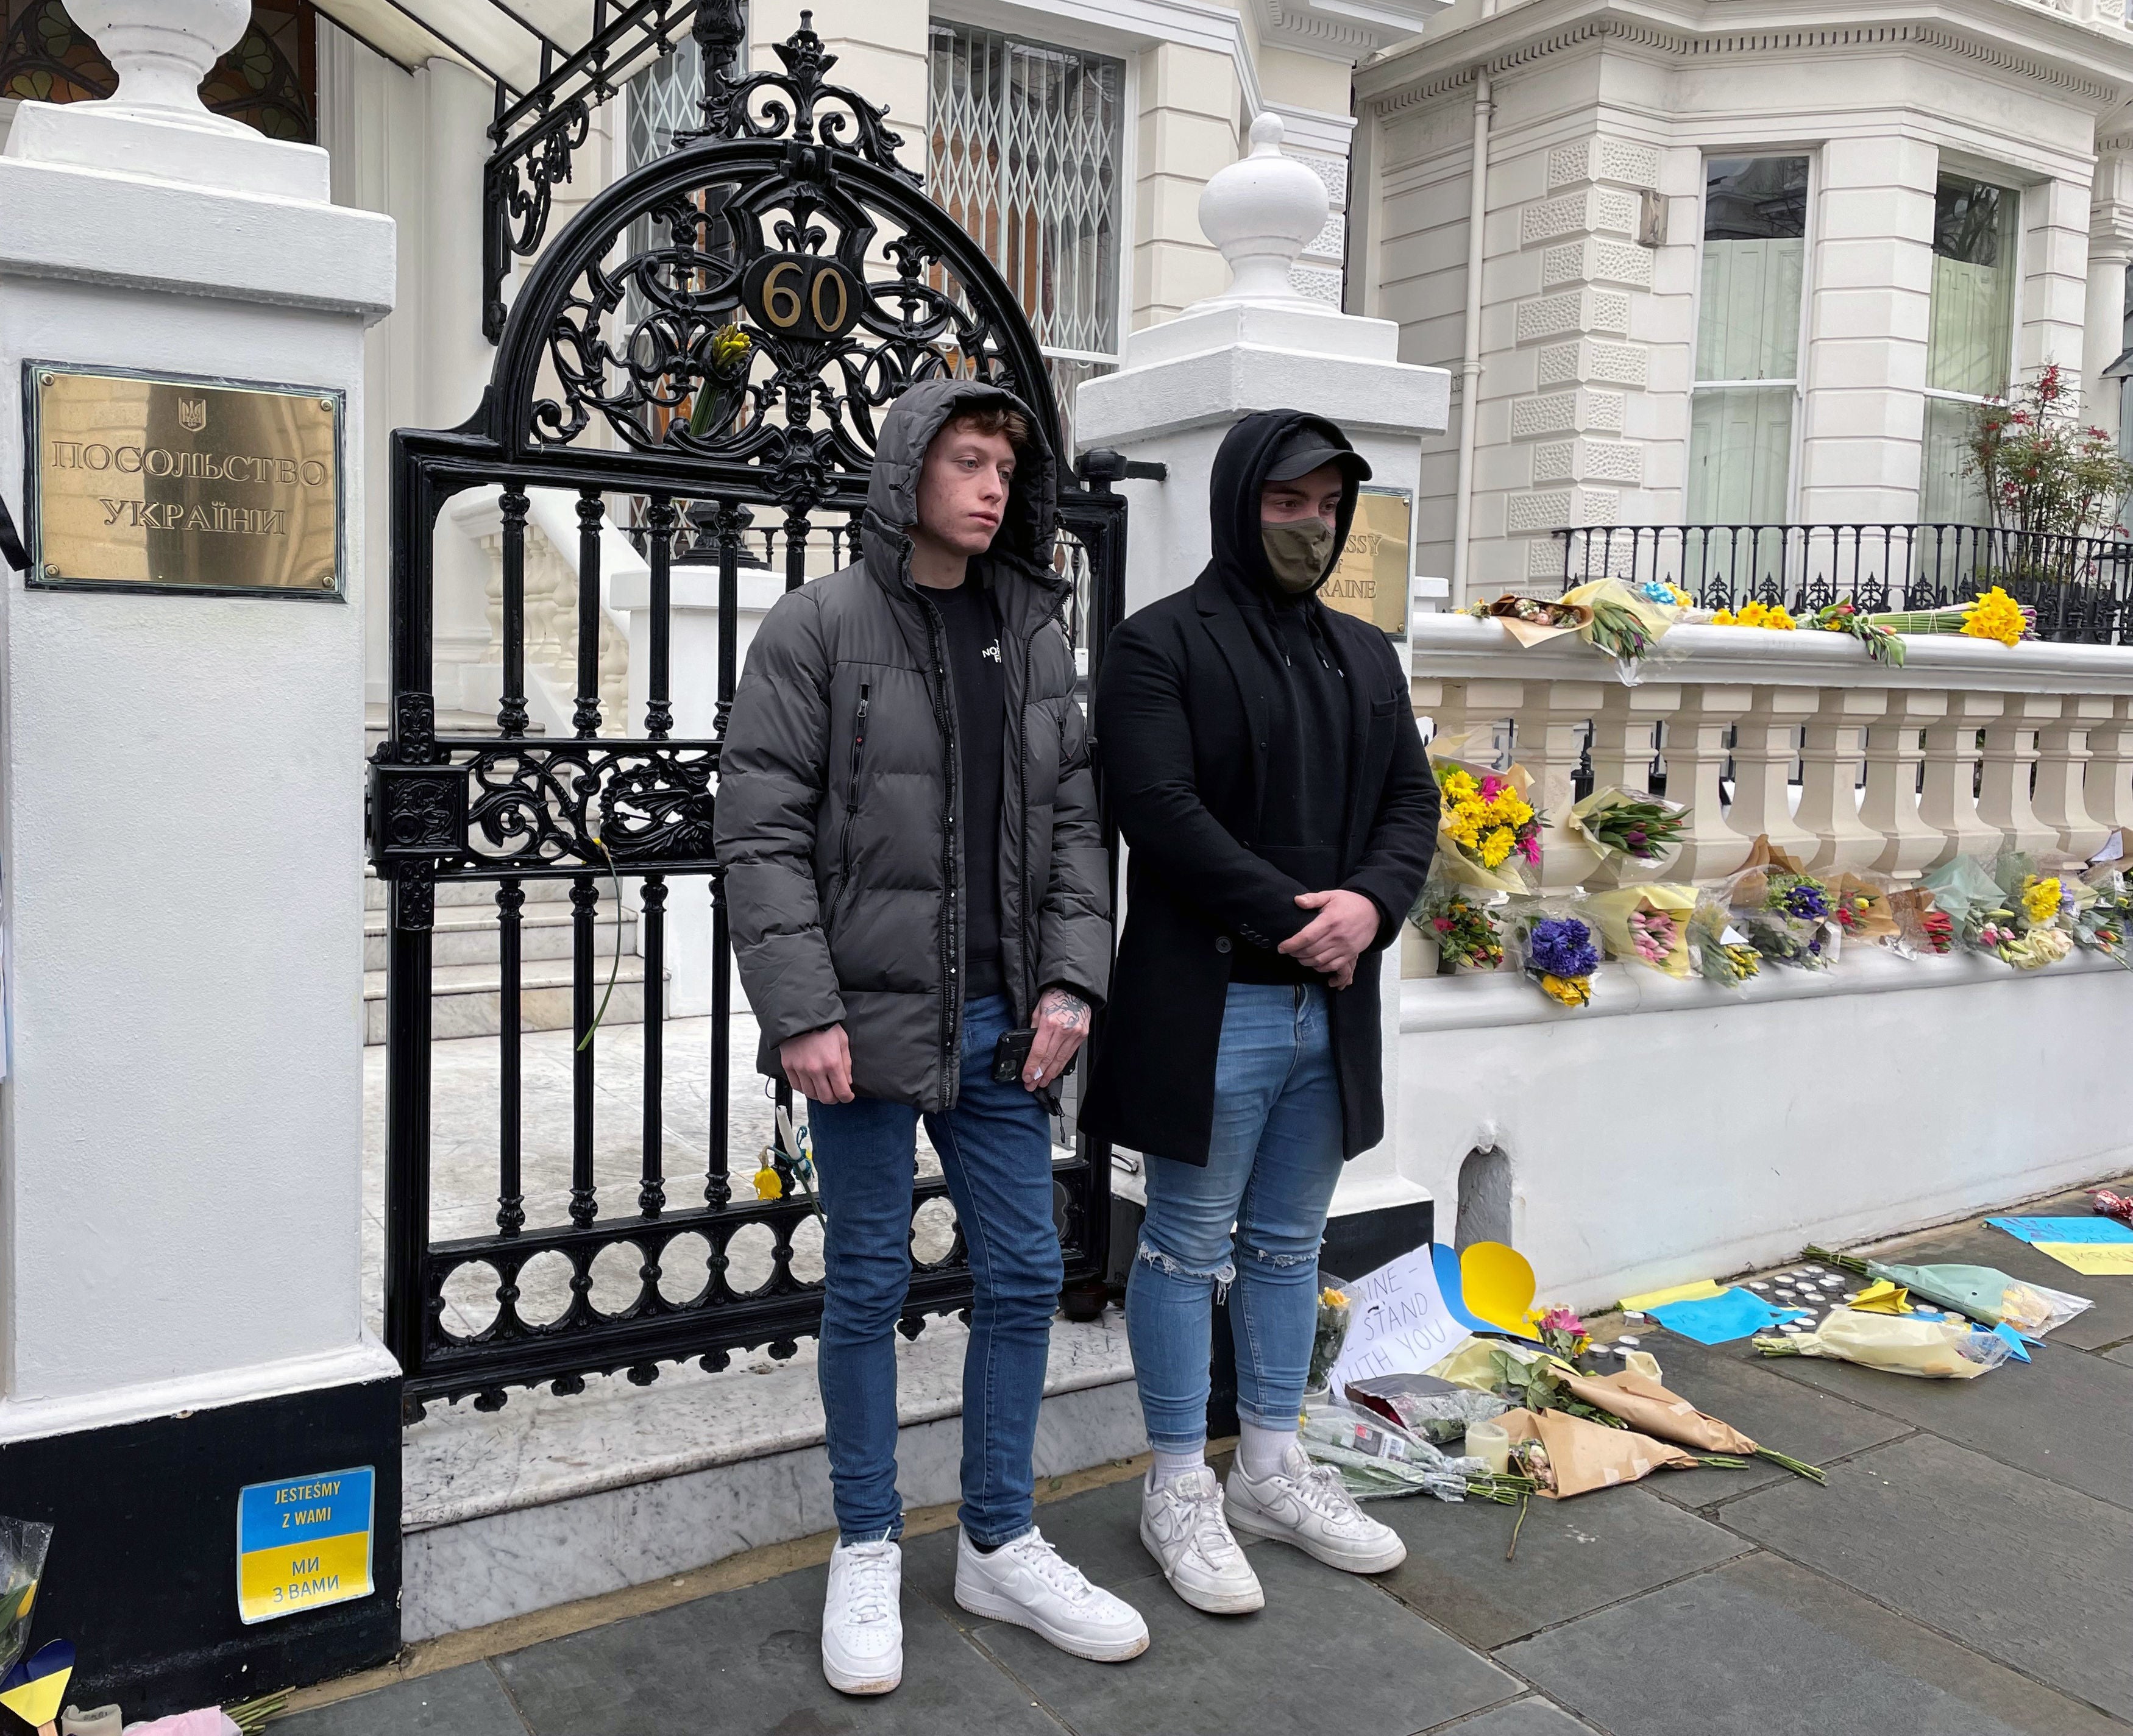 Tom, 20, and Lucas, 21, arrive to join the Ukrainian armed forces at the countr’s embassy in west London on Tuesday.